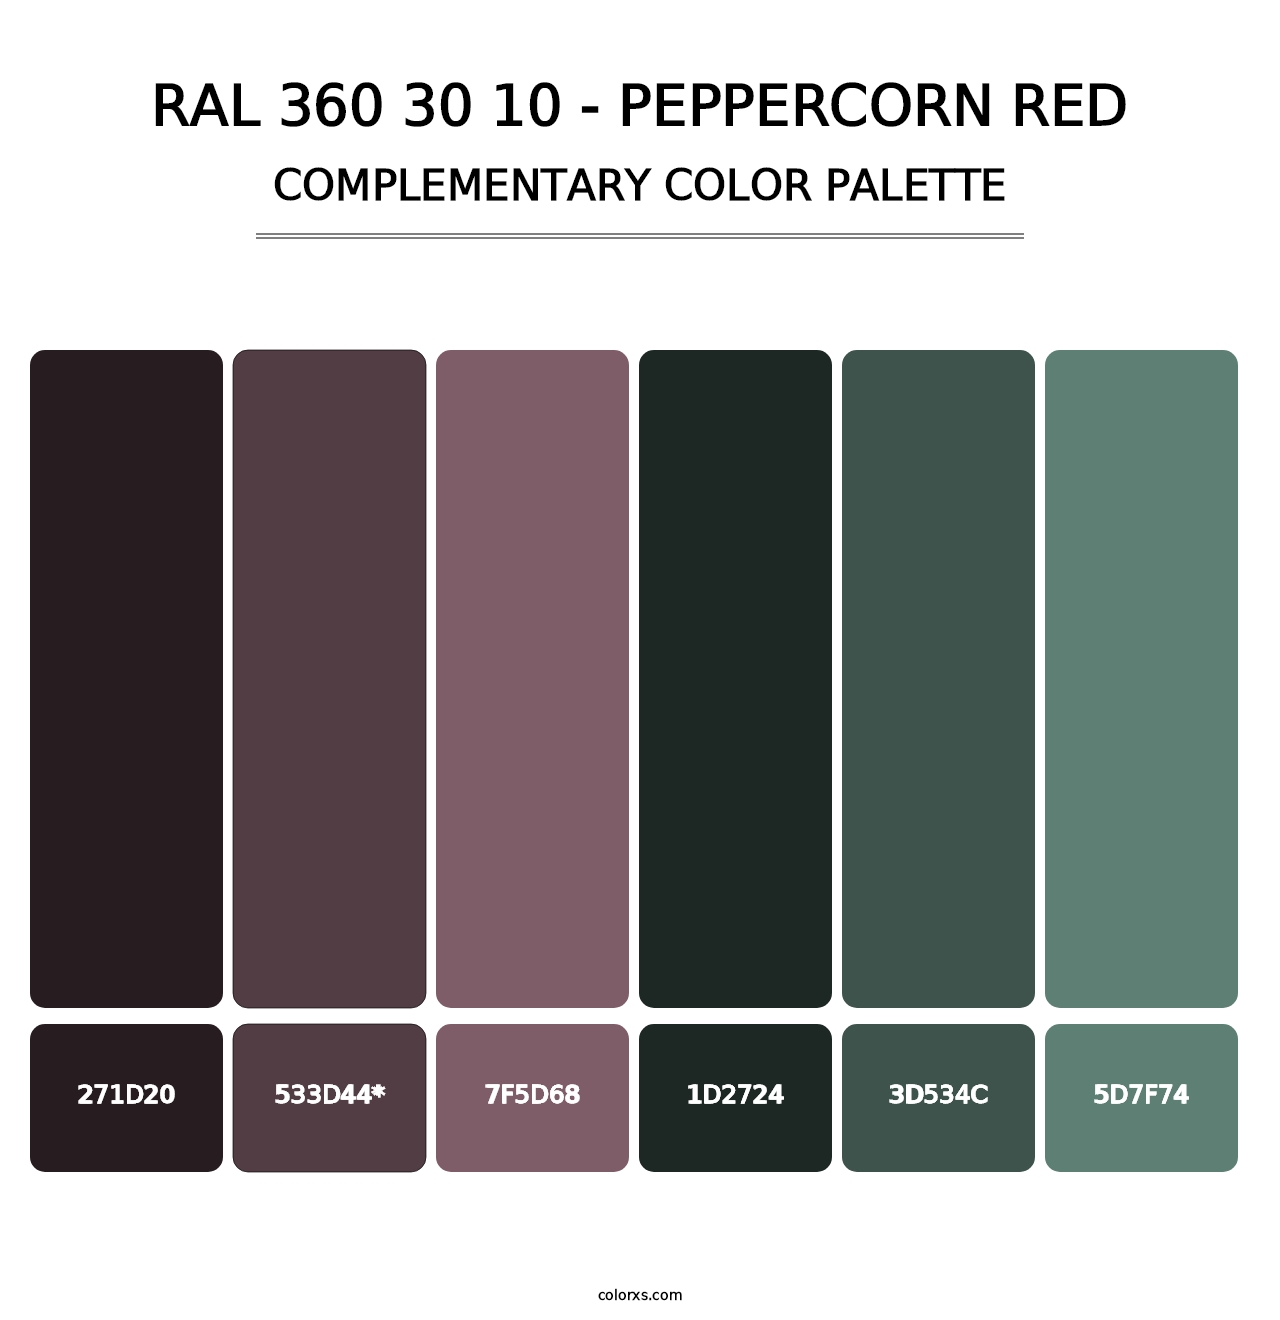 RAL 360 30 10 - Peppercorn Red - Complementary Color Palette